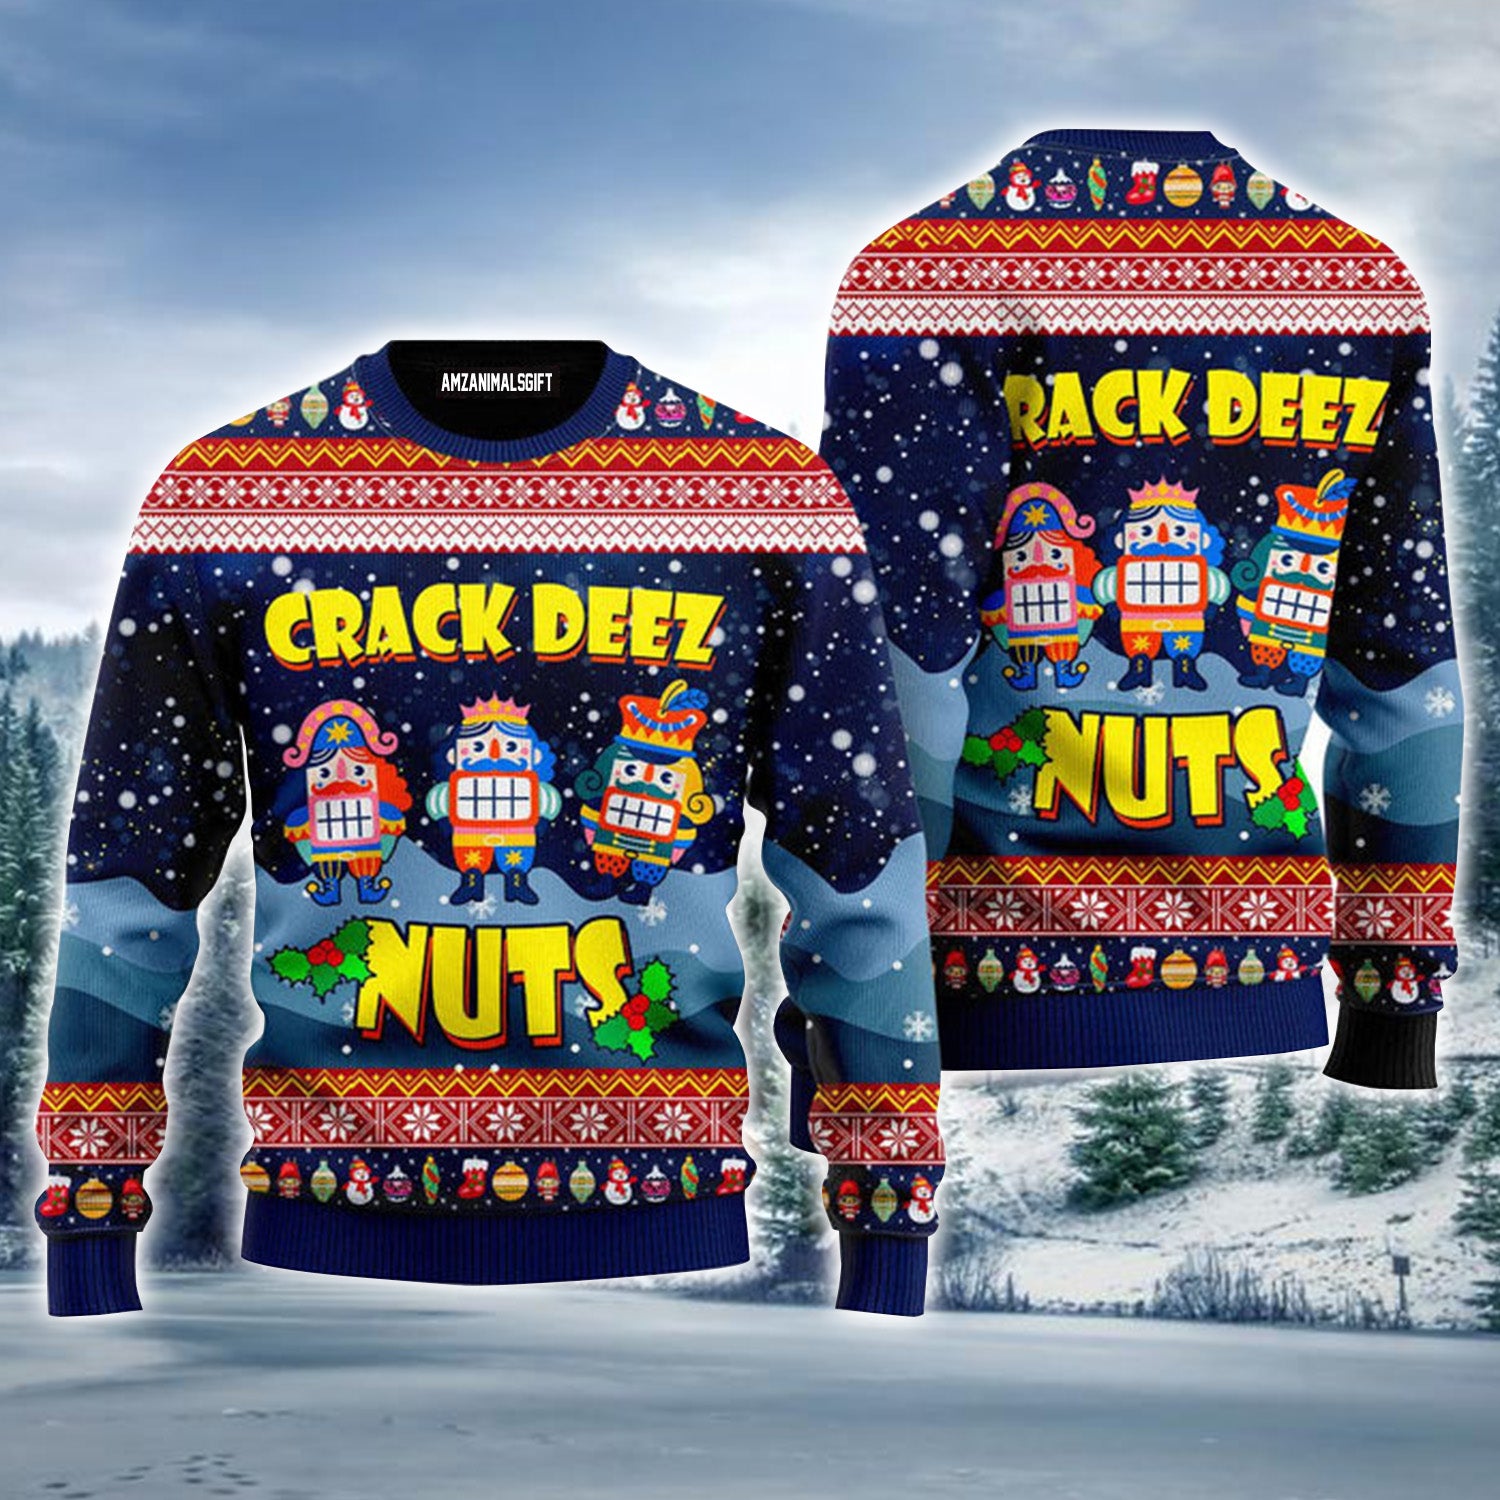 Crack Deez Nuts Nutcracker Urly Christmas Sweater, Christmas Sweater For Men & Women - Perfect Gift For Christmas, New Year, Winter Holiday